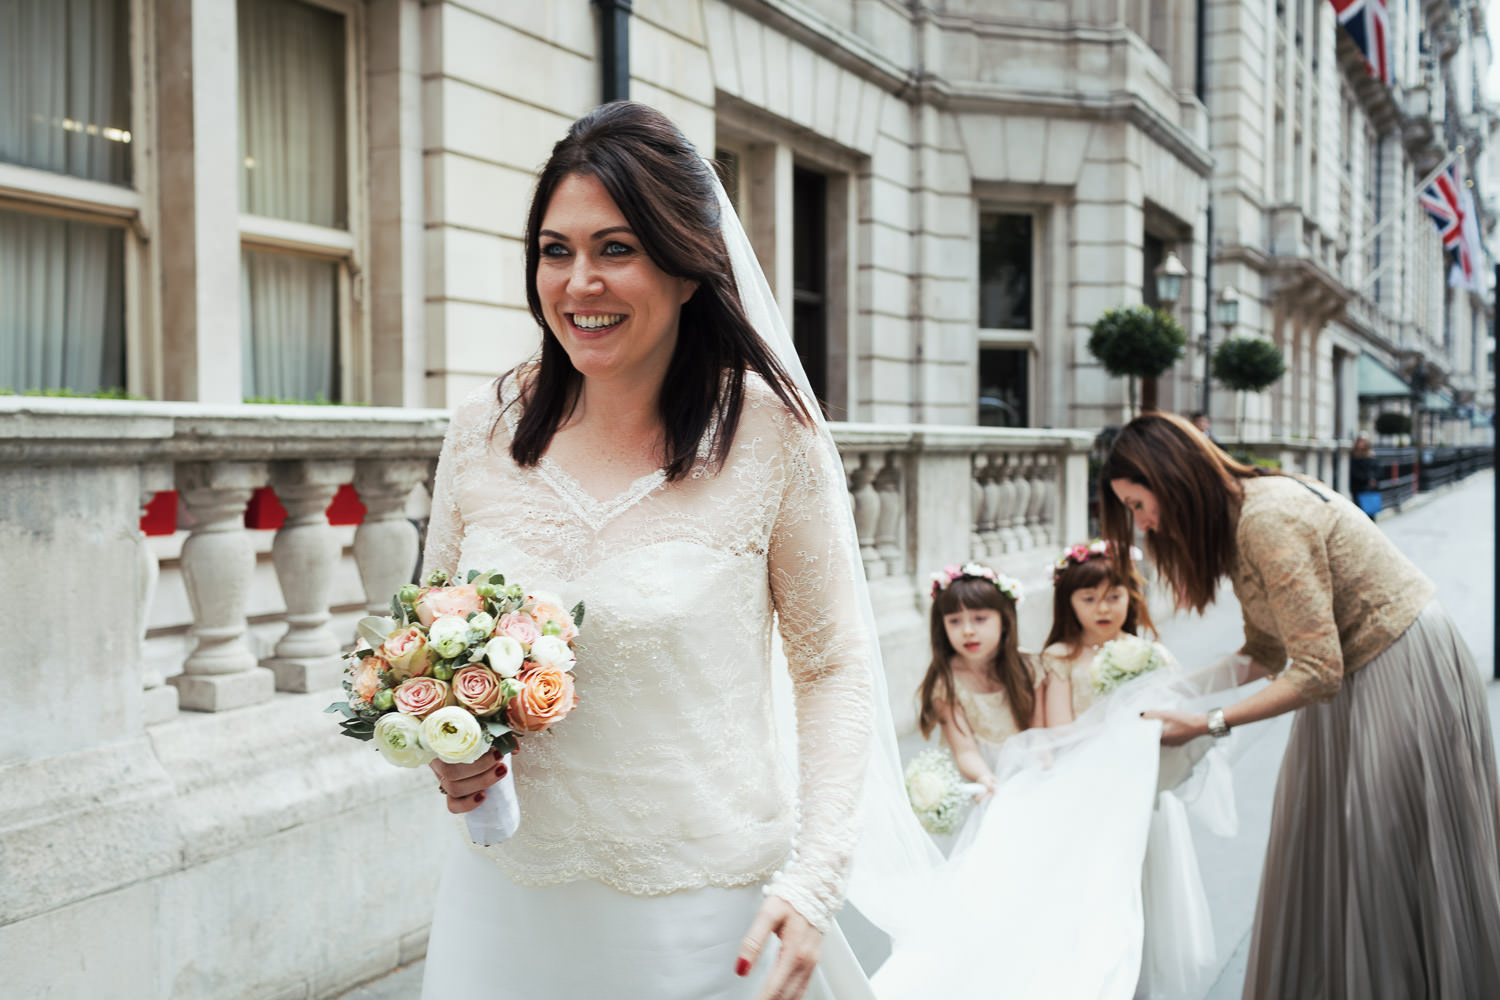 Bride arriving at The National Liberal Club at Whitehall Place, flower girls and sister holding her train and veil.